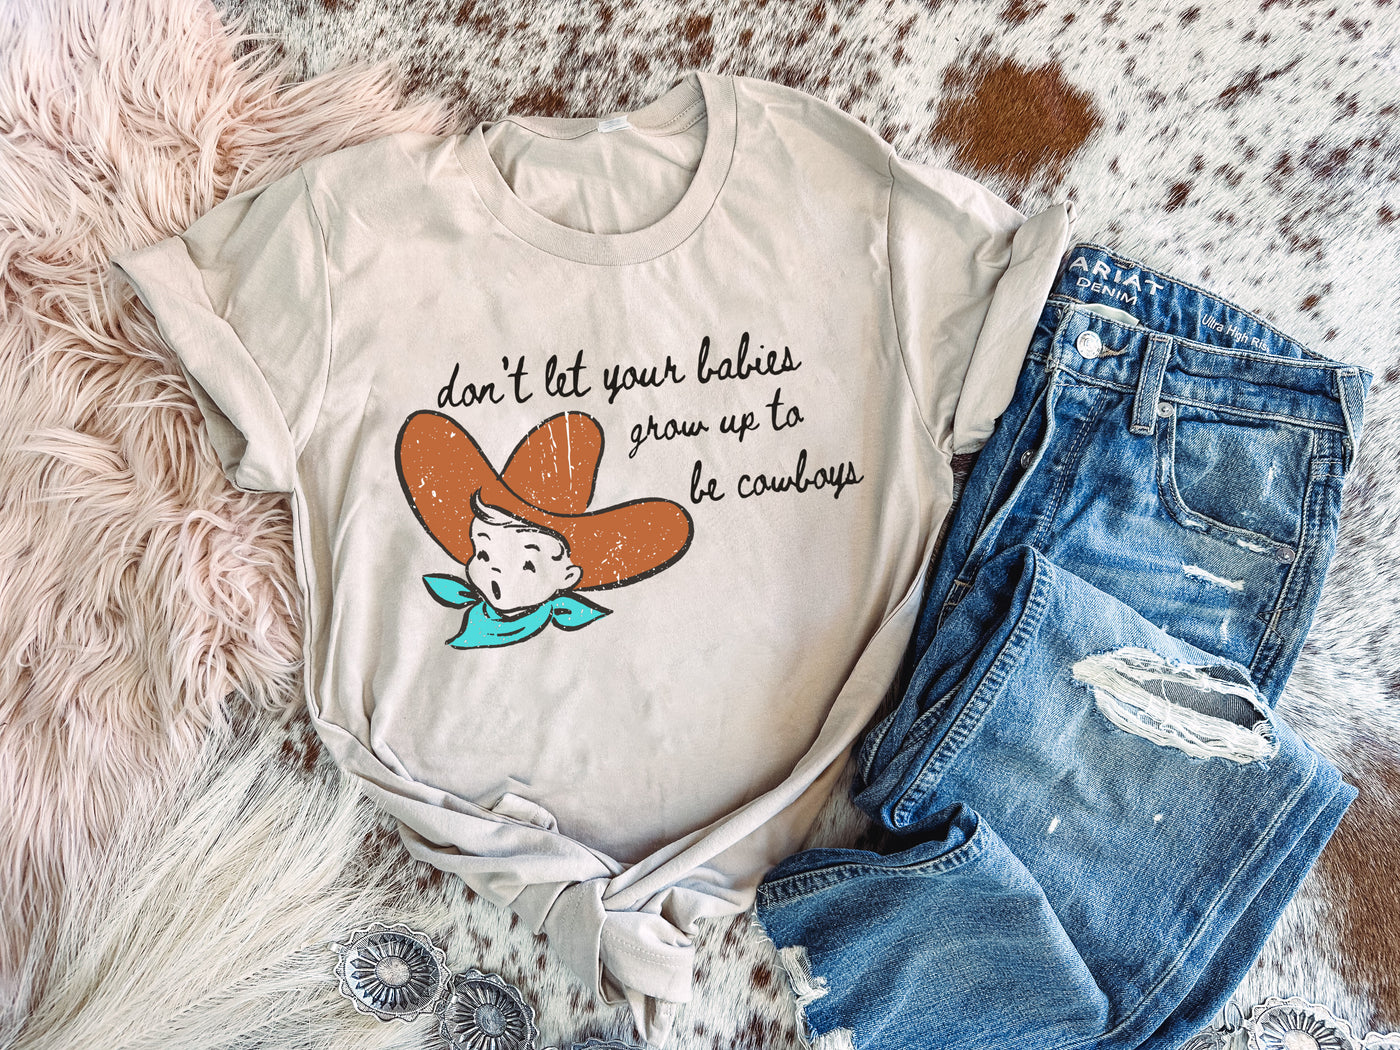 Grow Up To Be Cowboys - Graphic Top